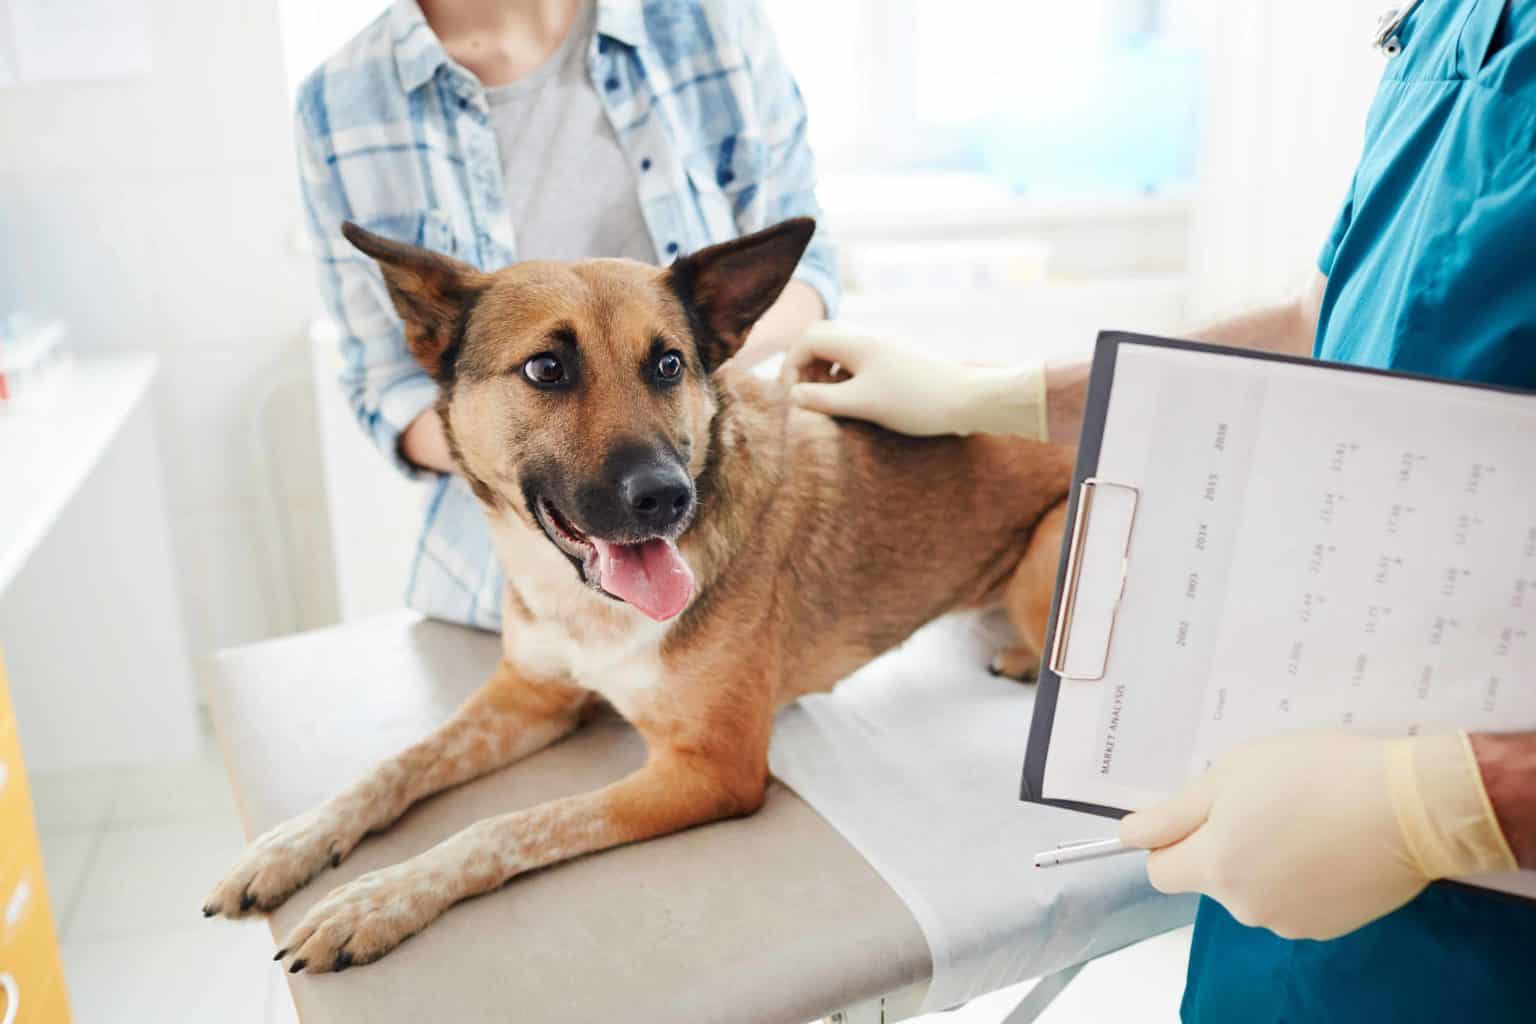 German Shepherd gets vet exam. Dogs can get sick just like humans and other pets. Do you know the most prominent signs that your dog is dealing with sickness?